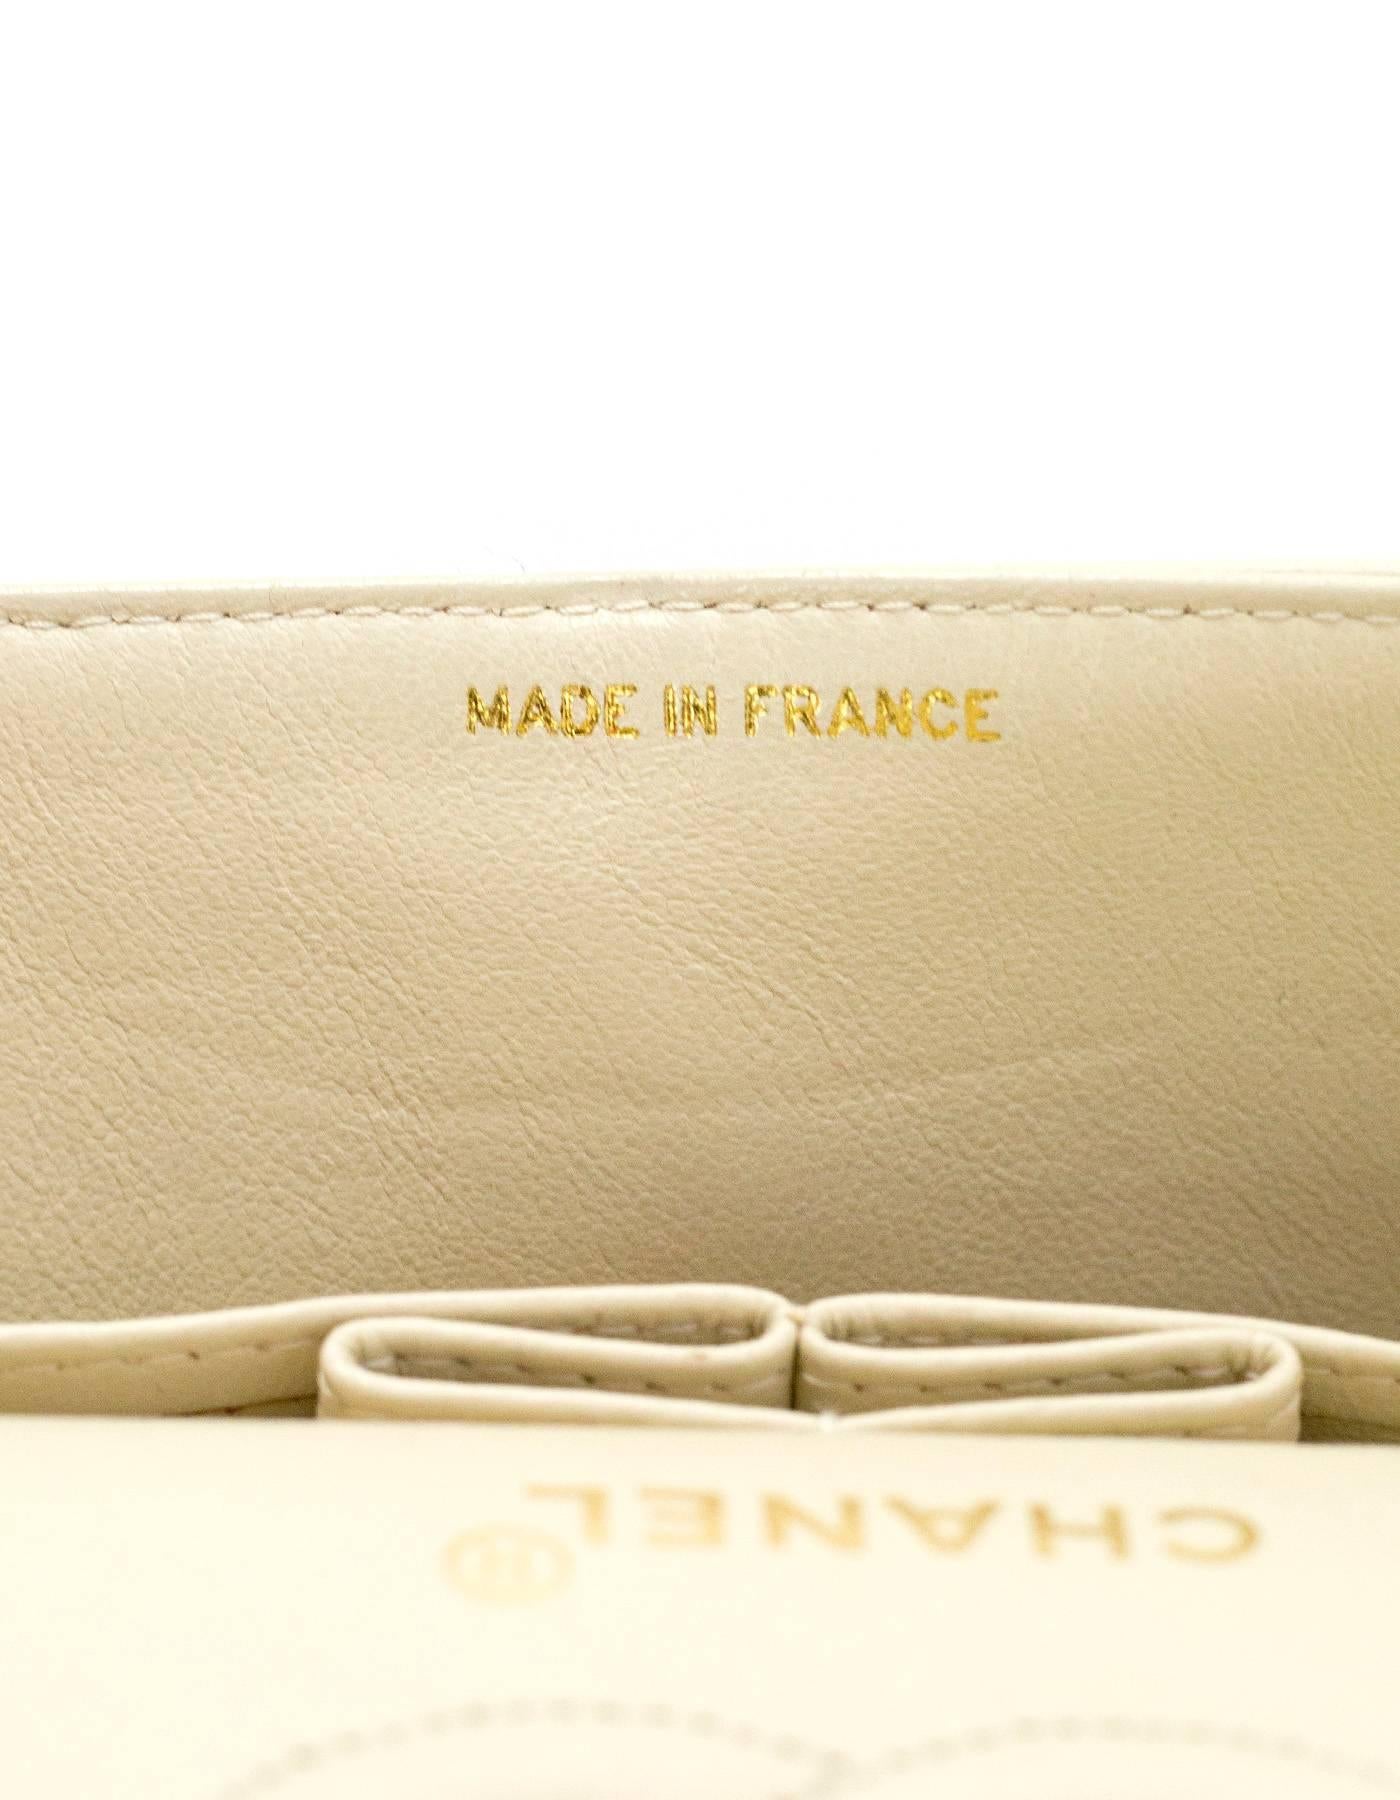 Chanel Vintage Cream Quilted Lambskin Small 9